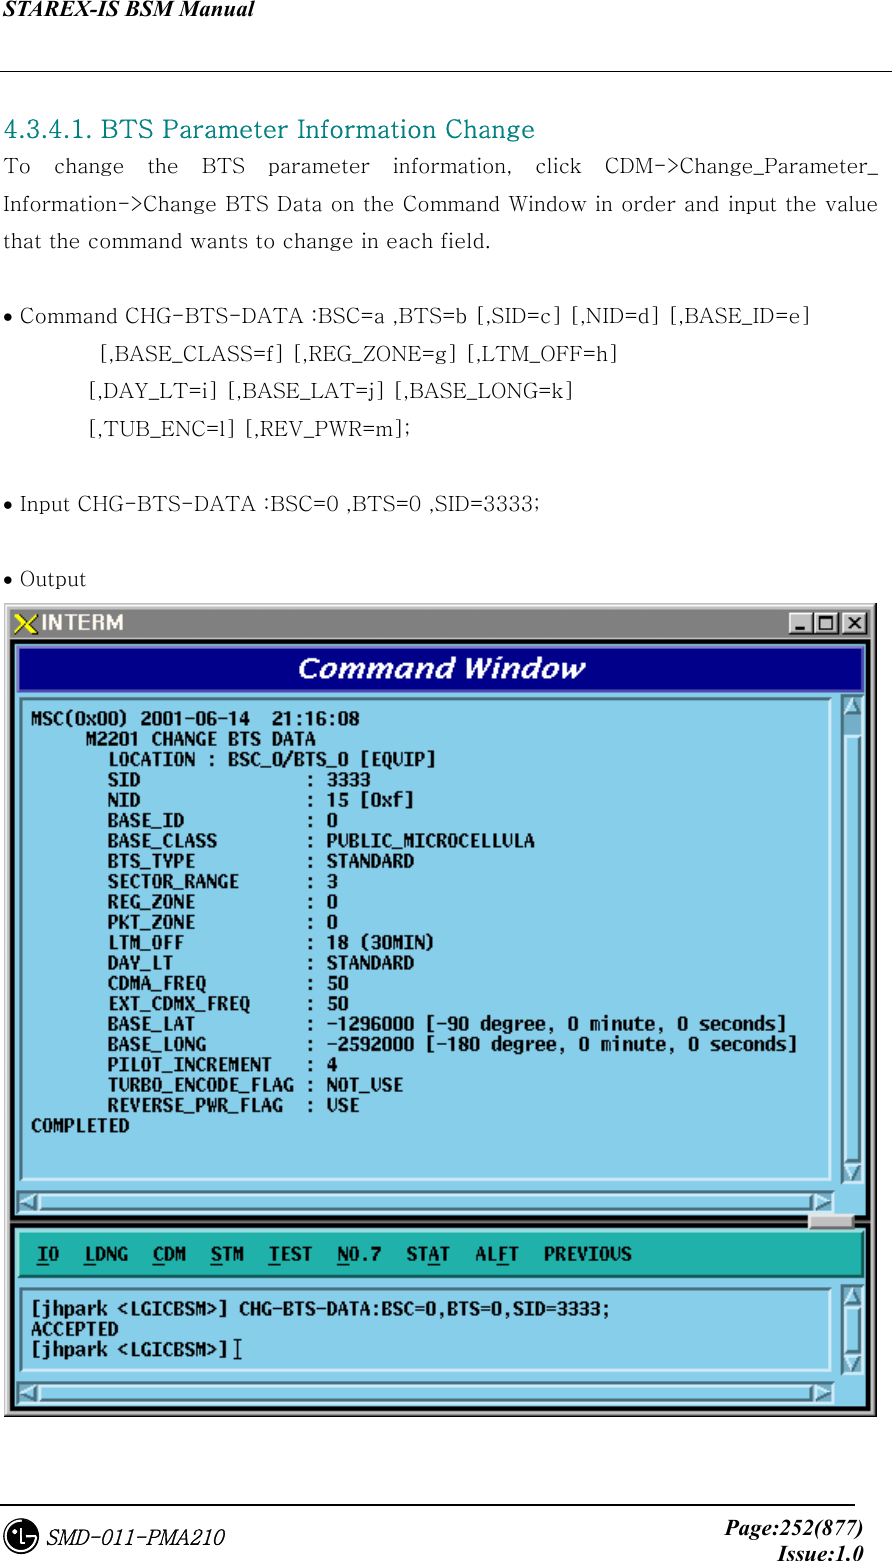 STAREX-IS BSM Manual     Page:252(877)Issue:1.0SMD-011-PMA210  4.3.4.1. BTS Parameter Information Change To  change  the  BTS  parameter  information, click CDM-&gt;Change_Parameter_ Information-&gt;Change BTS Data on the Command Window in order and input the value that the command wants to change in each field.  • Command CHG-BTS-DATA :BSC=a ,BTS=b [,SID=c] [,NID=d] [,BASE_ID=e]          [,BASE_CLASS=f] [,REG_ZONE=g] [,LTM_OFF=h]   [,DAY_LT=i] [,BASE_LAT=j] [,BASE_LONG=k]   [,TUB_ENC=l] [,REV_PWR=m];  • Input CHG-BTS-DATA :BSC=0 ,BTS=0 ,SID=3333;  • Output  